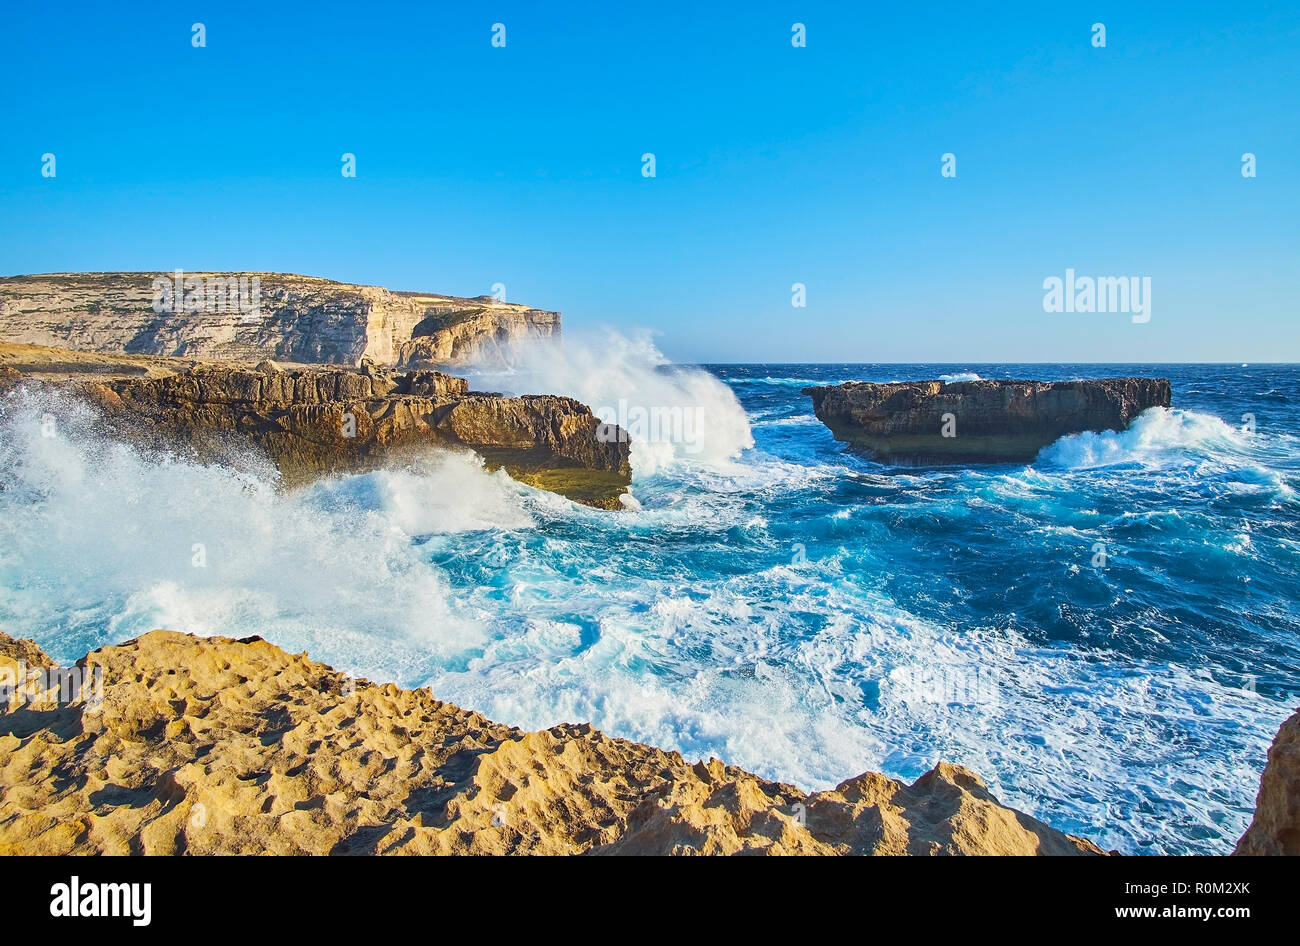 Indented rocky Dwejra coast is perfect place to watch the storm with massive foamy waves, meeting the coast with roar, San Lawrenz, Gozo, Malta. Stock Photo